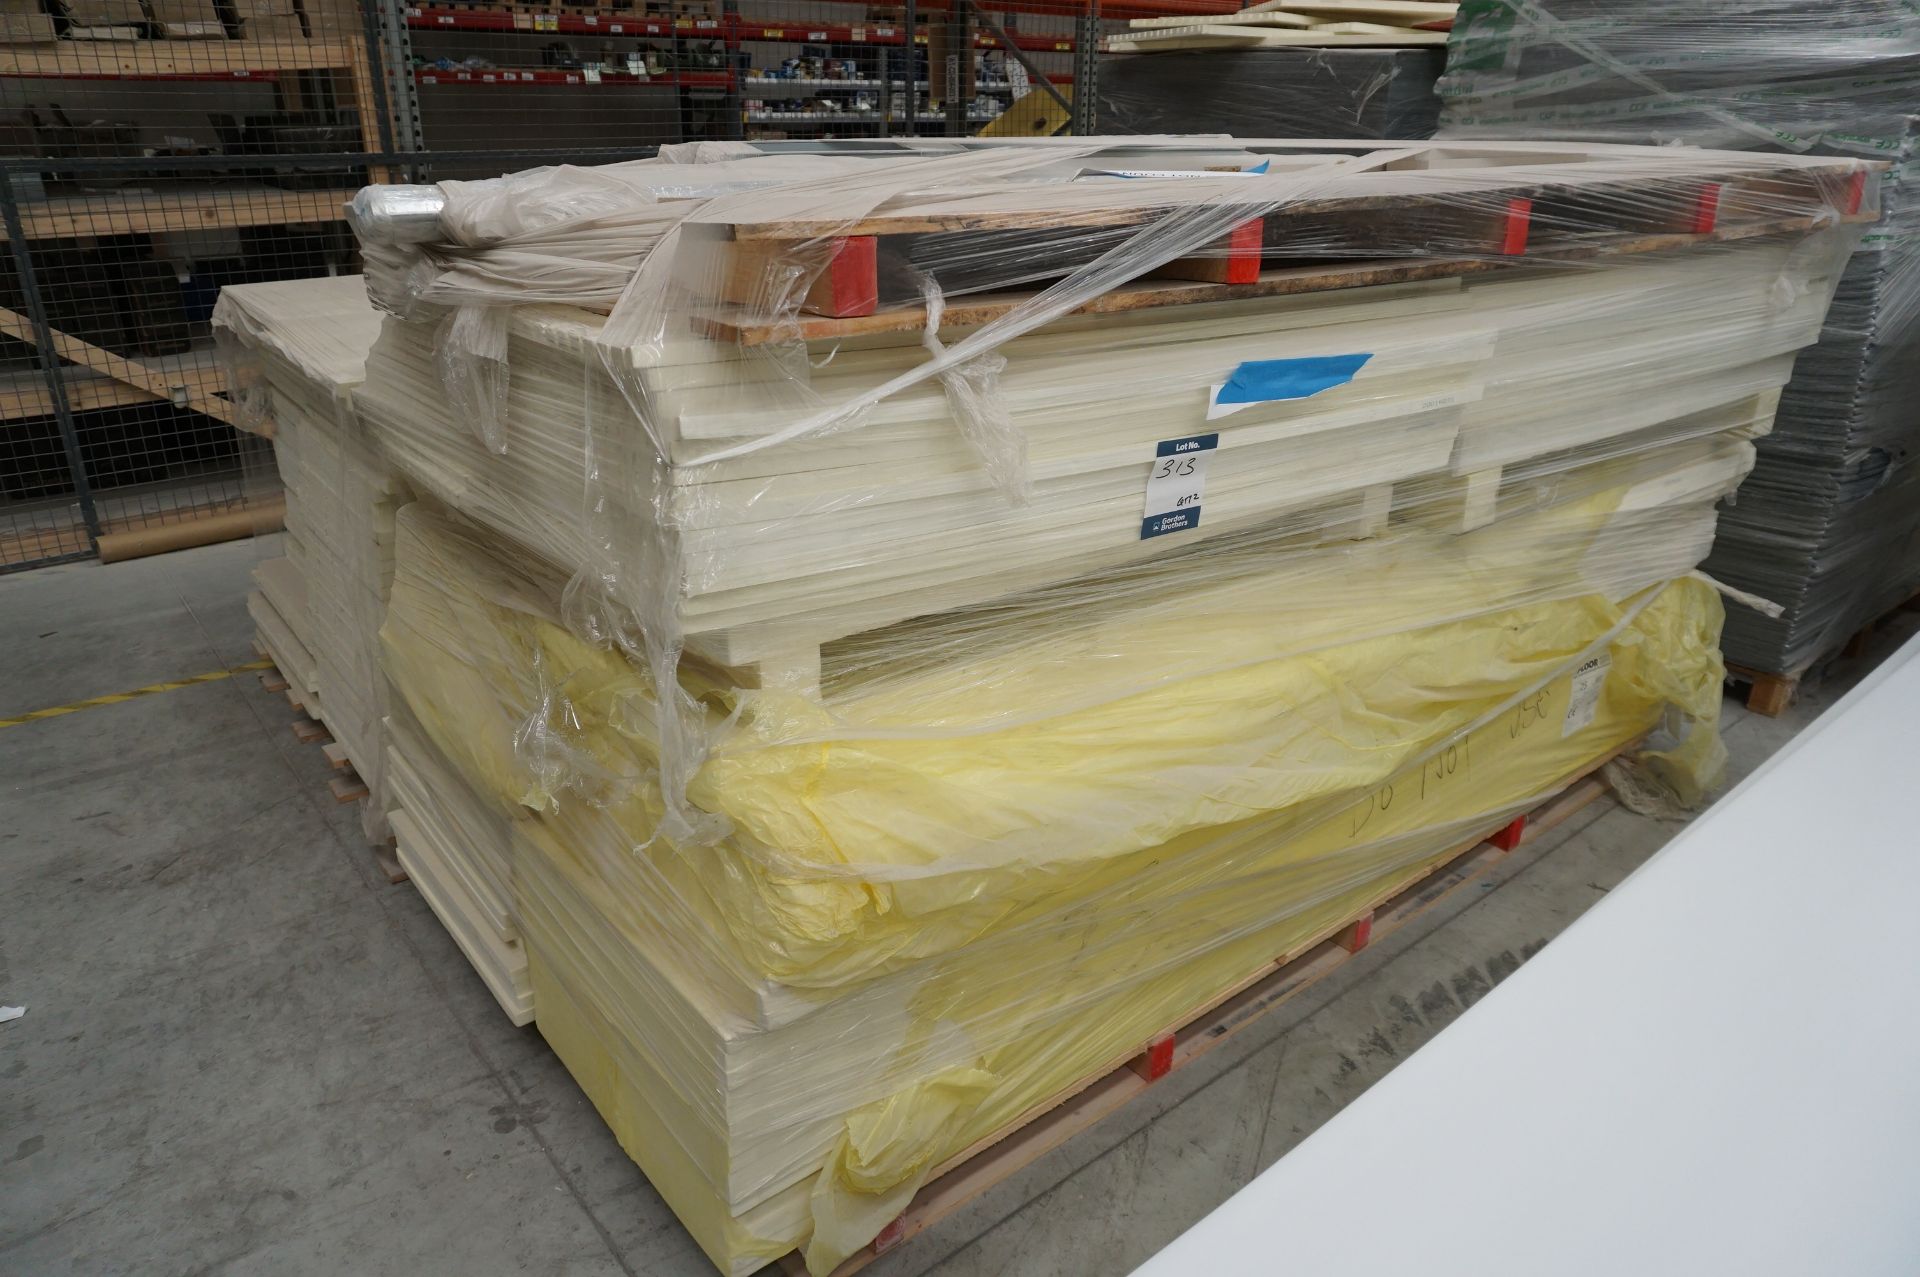 Quiet, Step T4 floor insulation on two pallets, approx. 700 sheets, 1190 x 593mm - Image 6 of 12